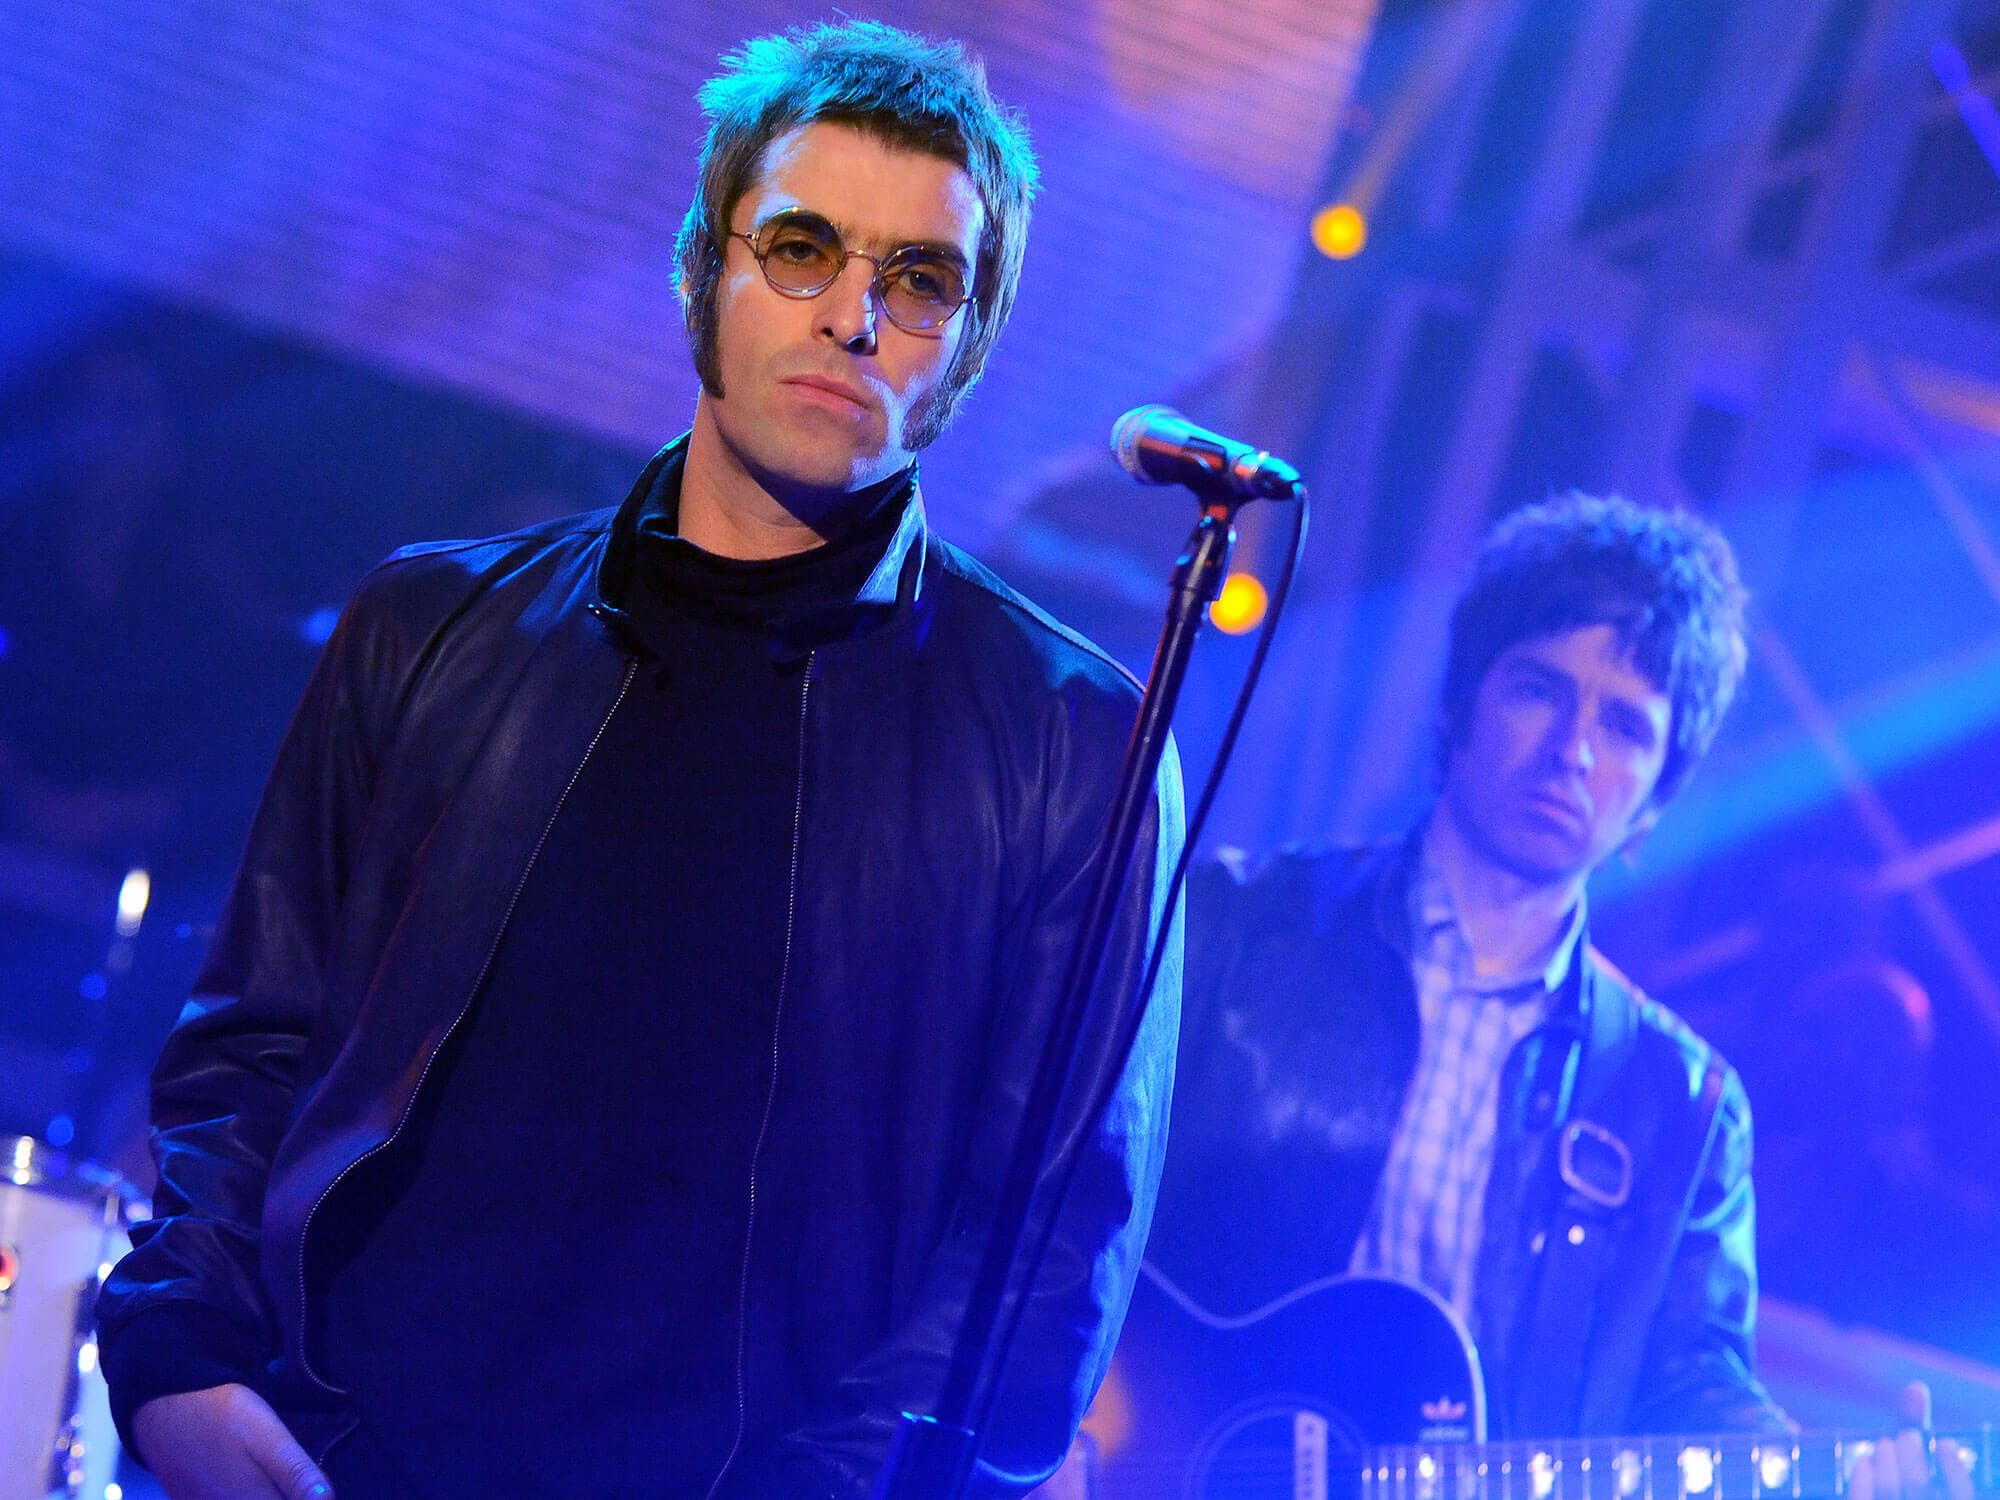 [L-R] Liam Gallagher and Noel Gallagher